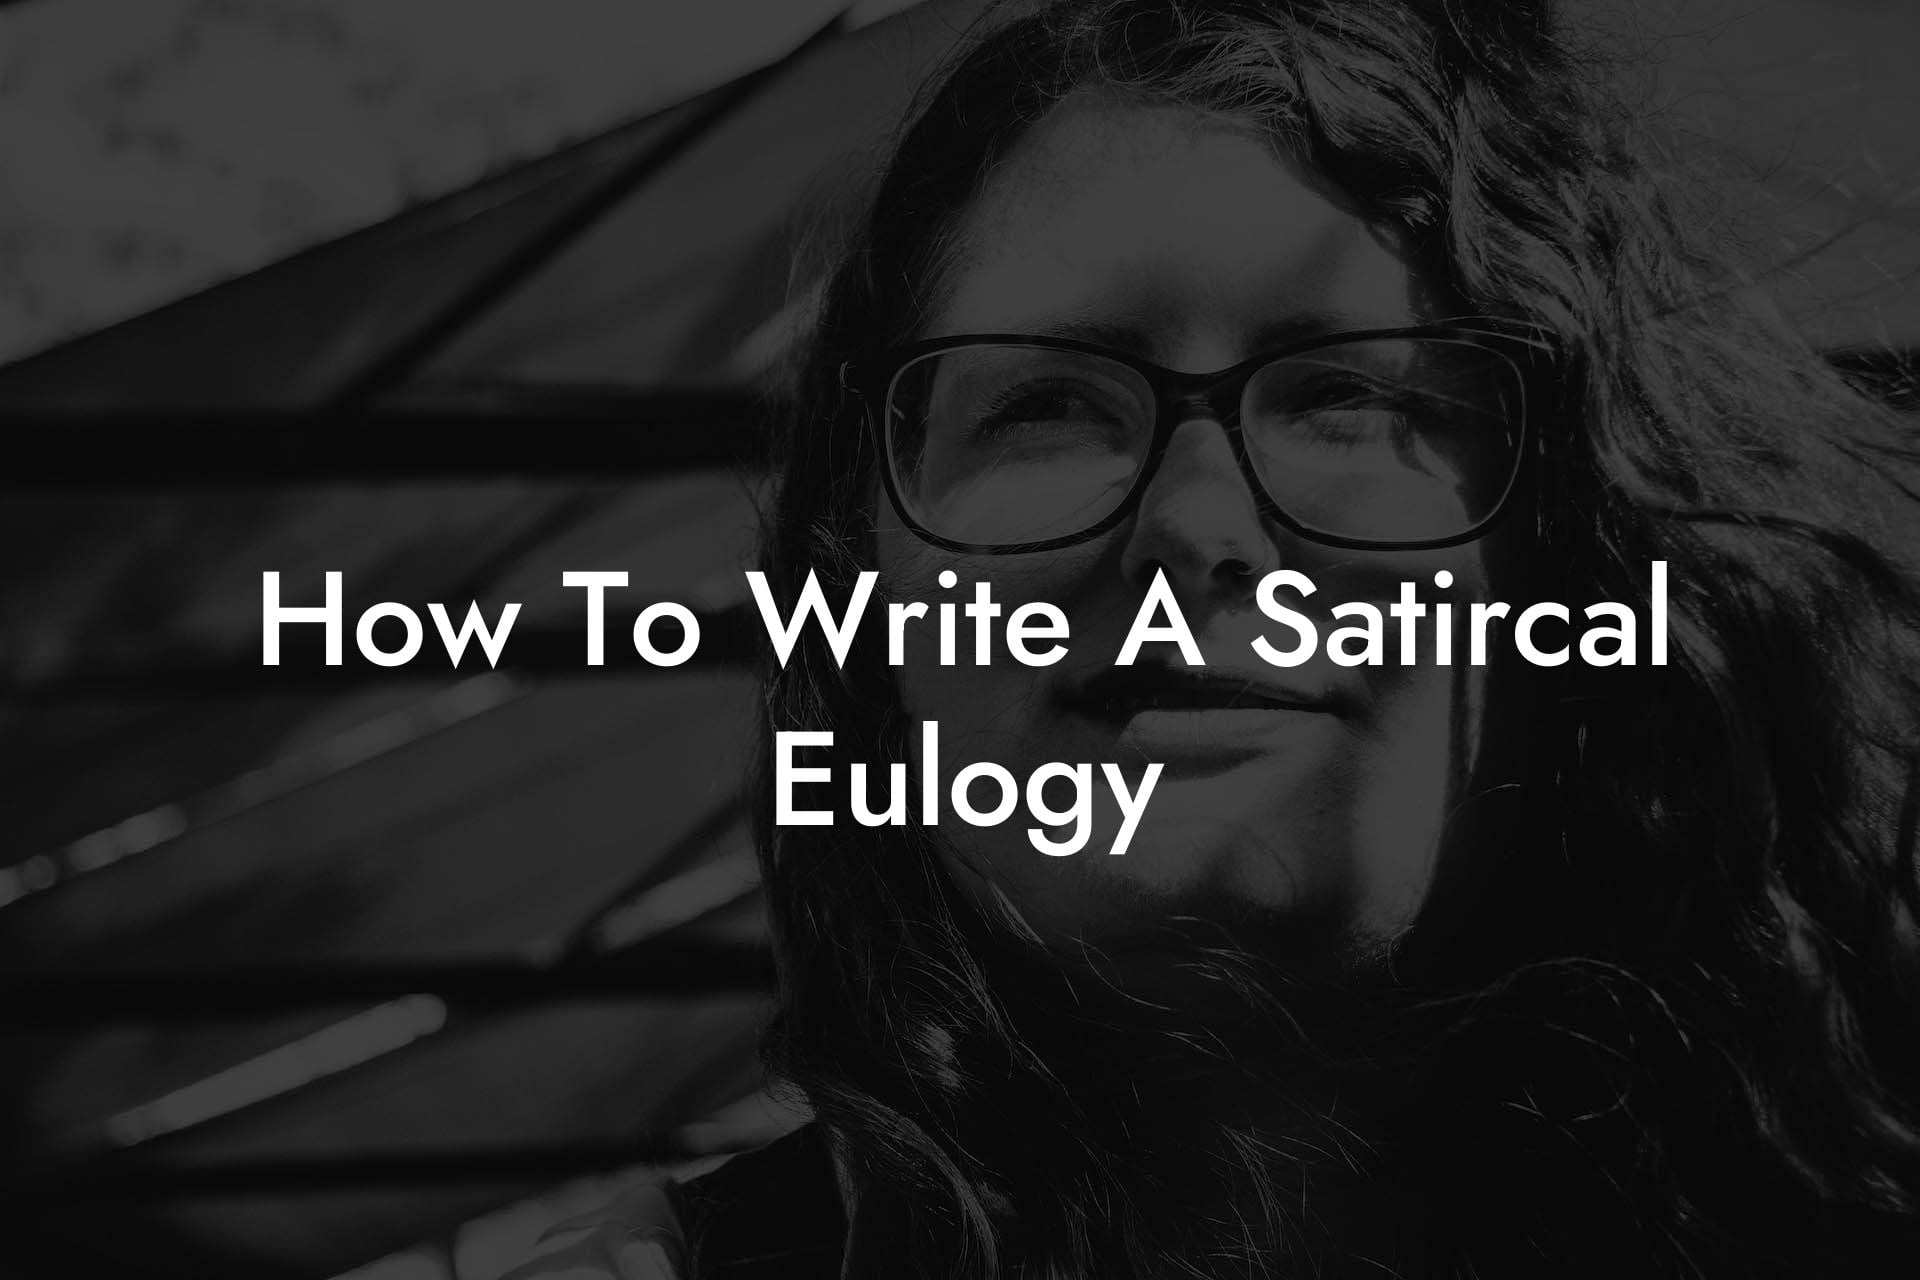 How To Write A Satircal Eulogy